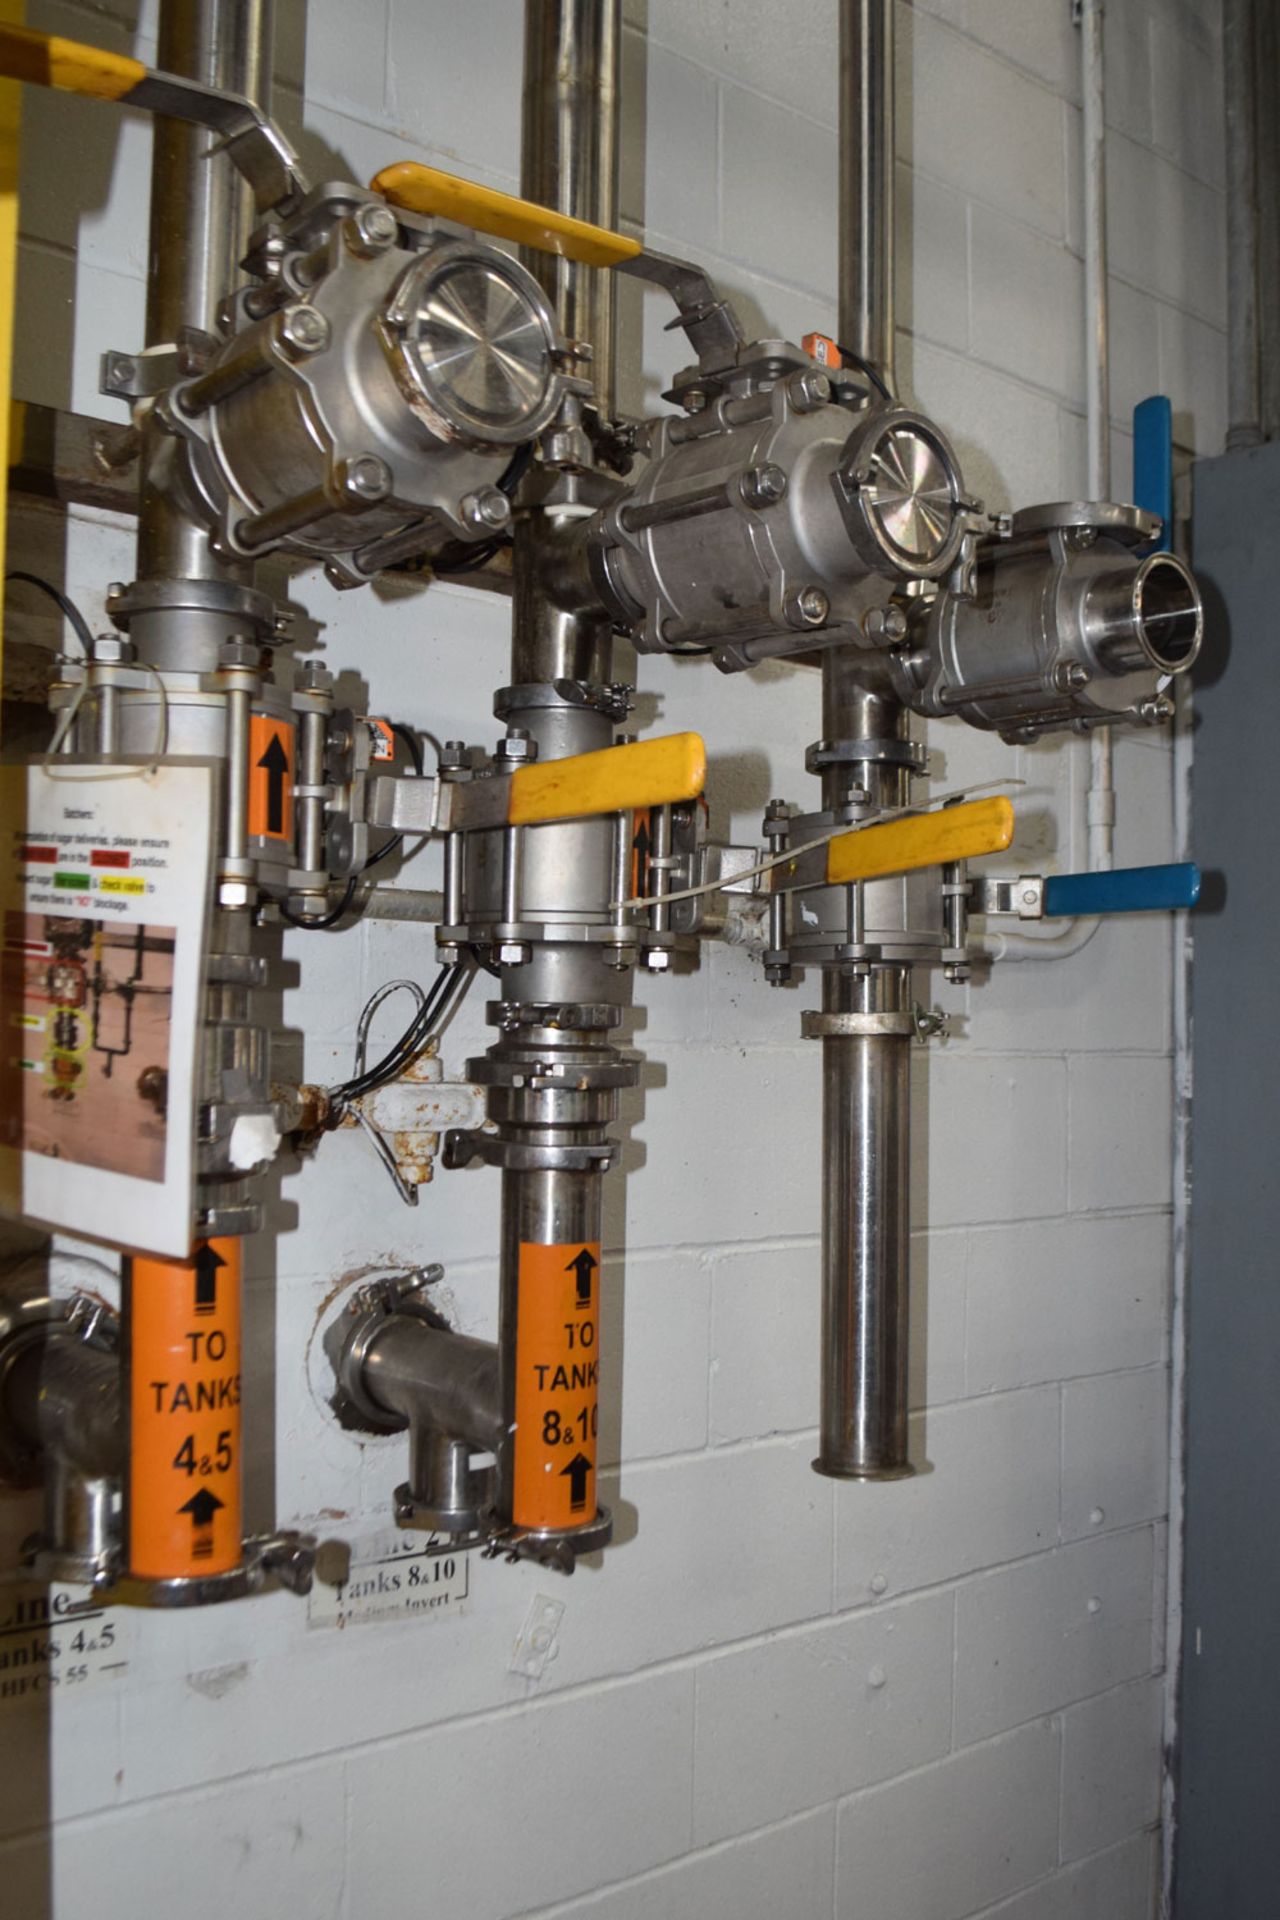 Bulk Liquid Delivery System Valves with S/S Control Cabinet by Line 2 Cooling Tunnel; Location In - Image 4 of 6